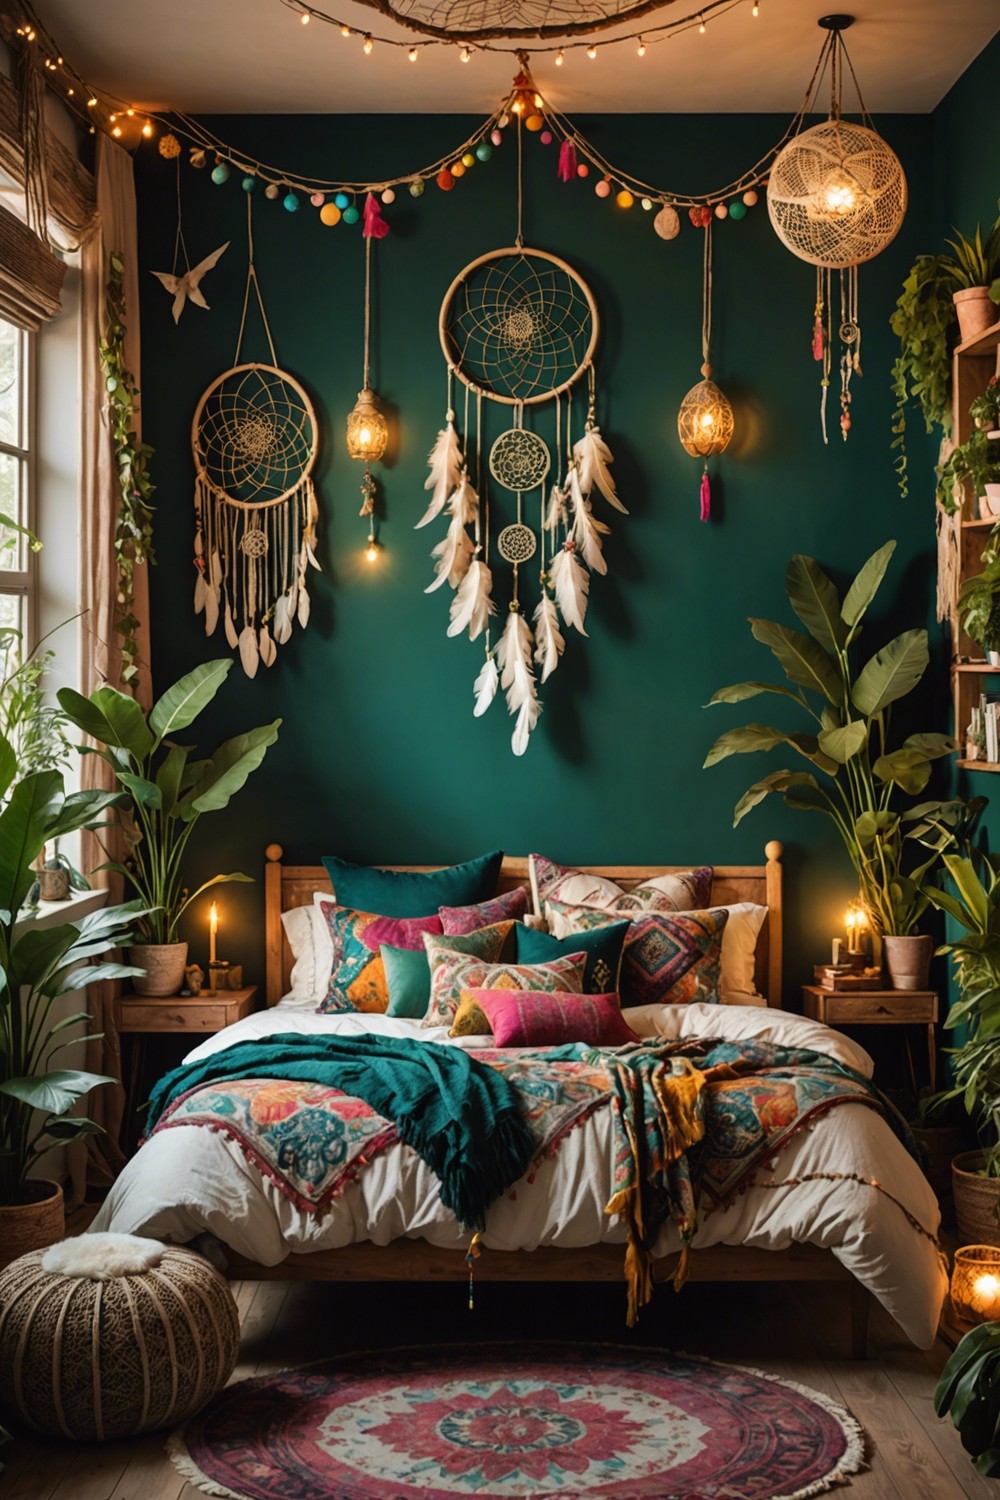 Dreamcatchers Above The Bed